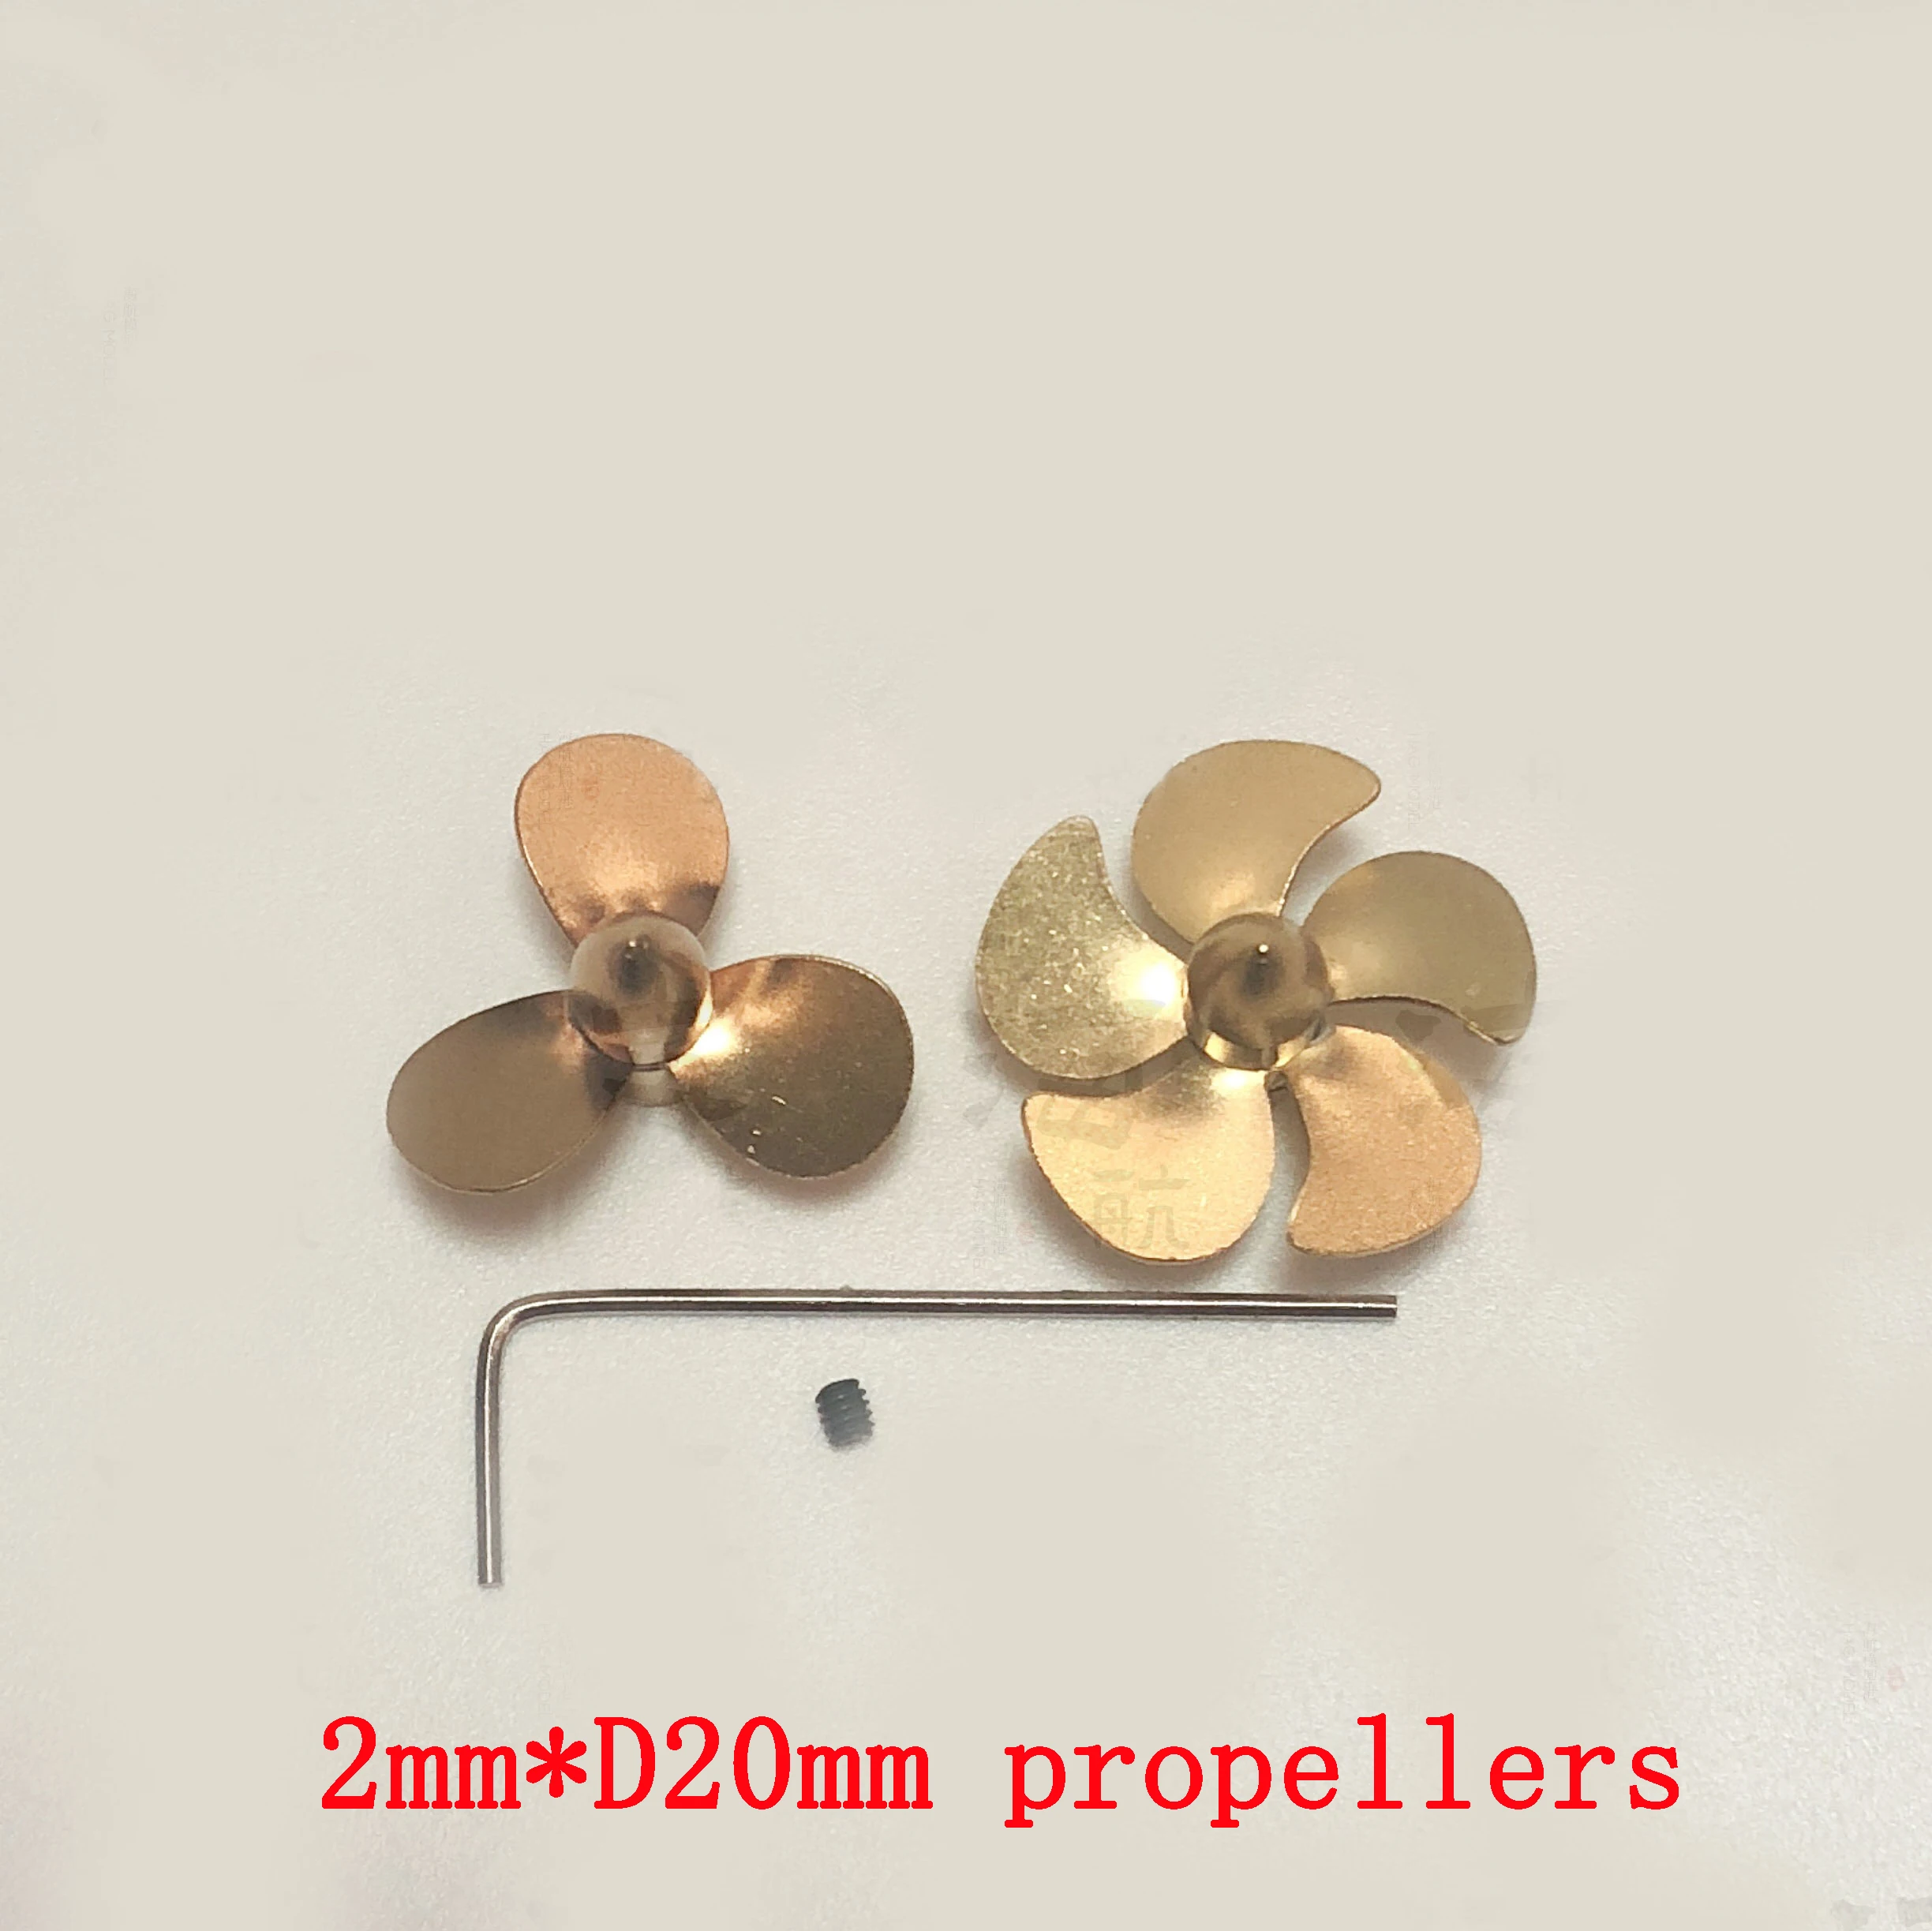 Brass 3 Blade Propeller M3 20mm Right Hand Side For Scale Model Boats 146-01 